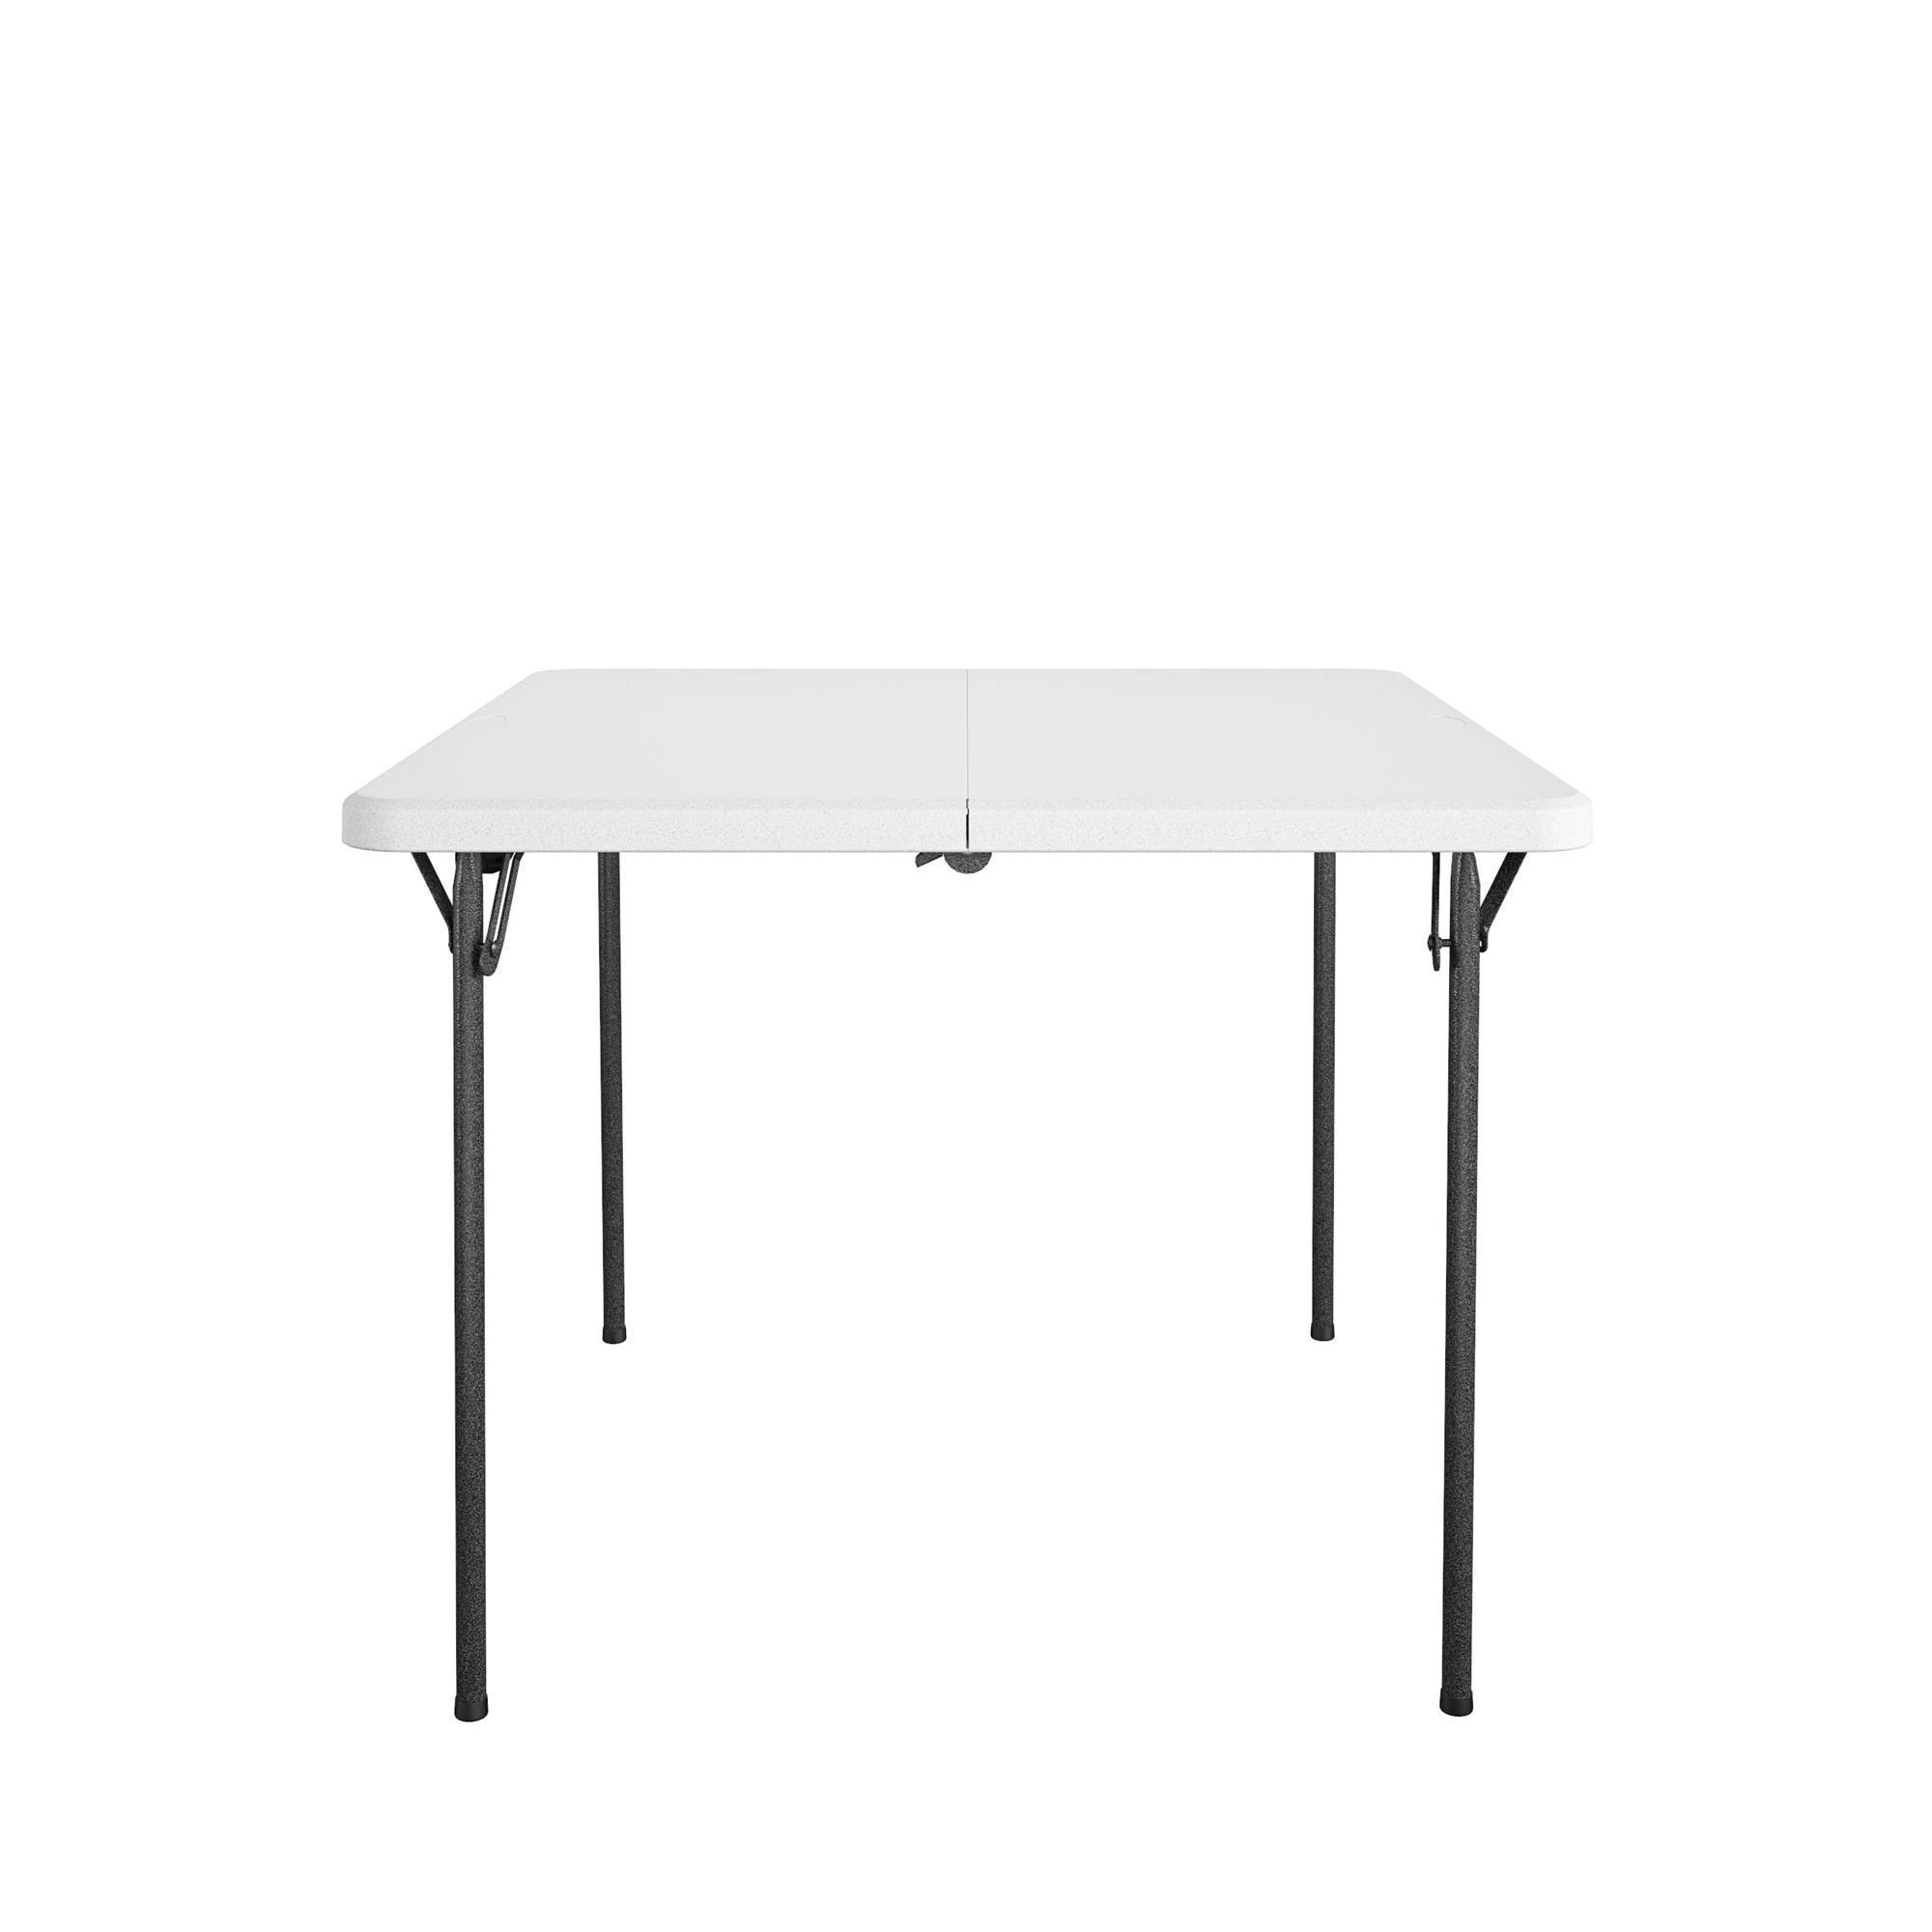 Cosco, Card Table: Spacious, easy setup, portable., Included (qty.) 1 Model 14633WSP1E